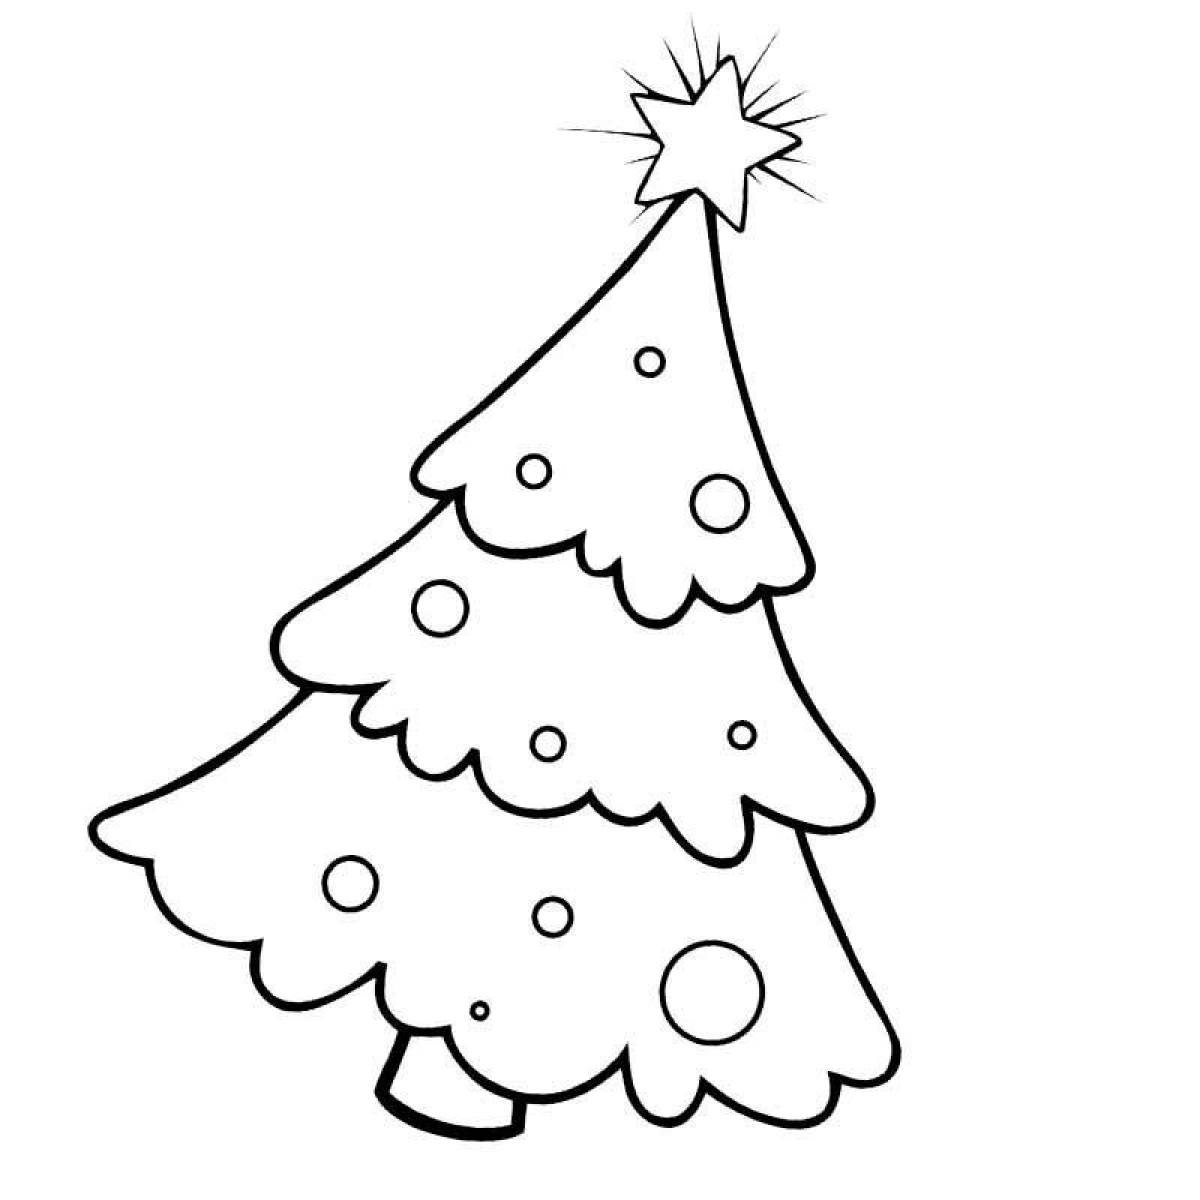 Coloring book joyful Christmas tree for children 2-3 years old